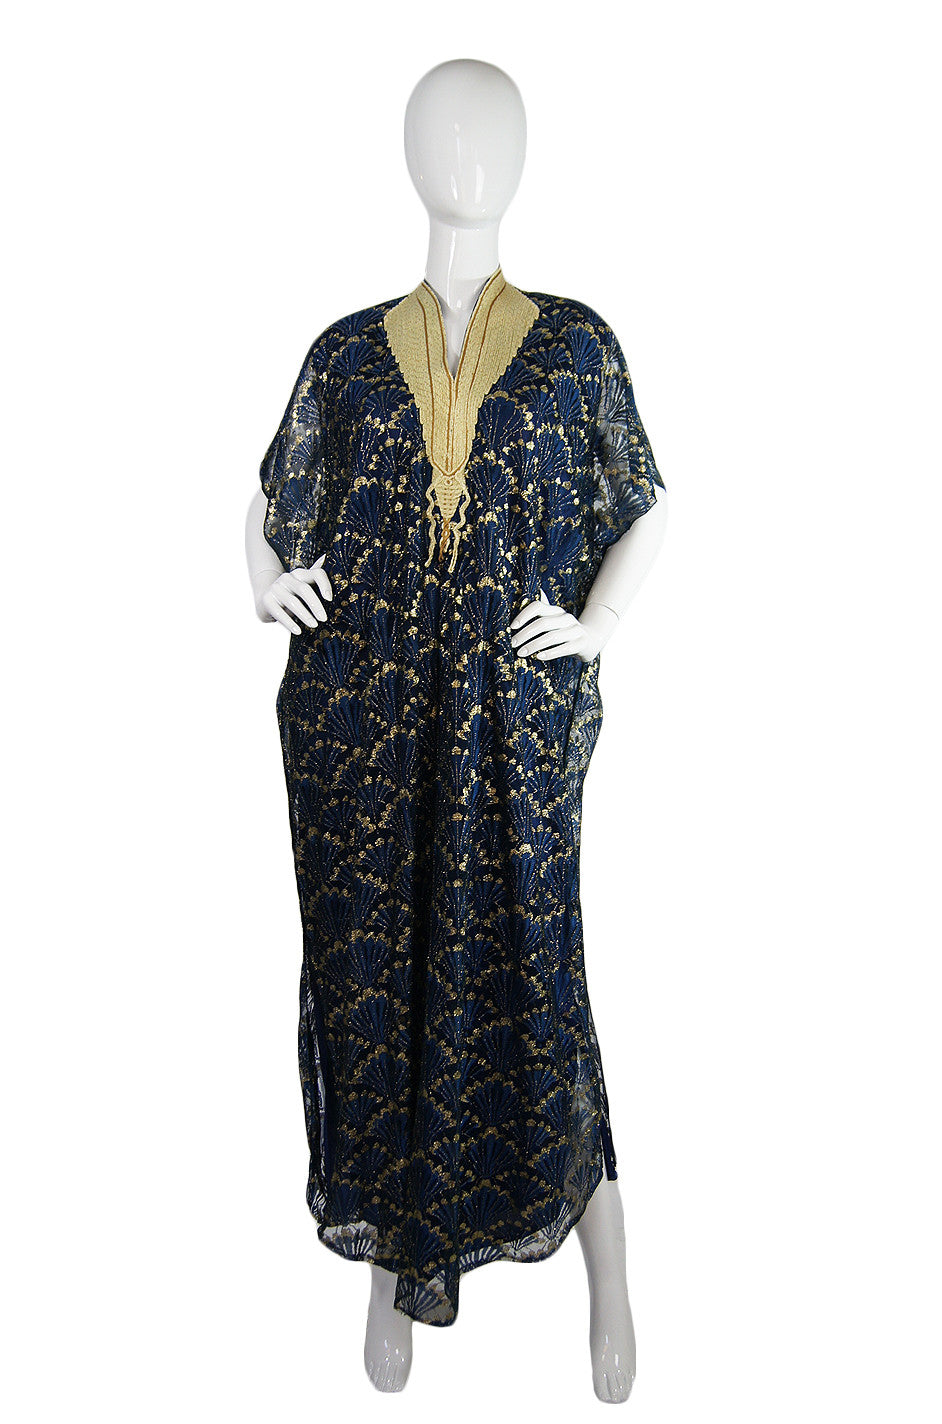 1970s Gold Thread & Embroidery Caftan – Shrimpton Couture